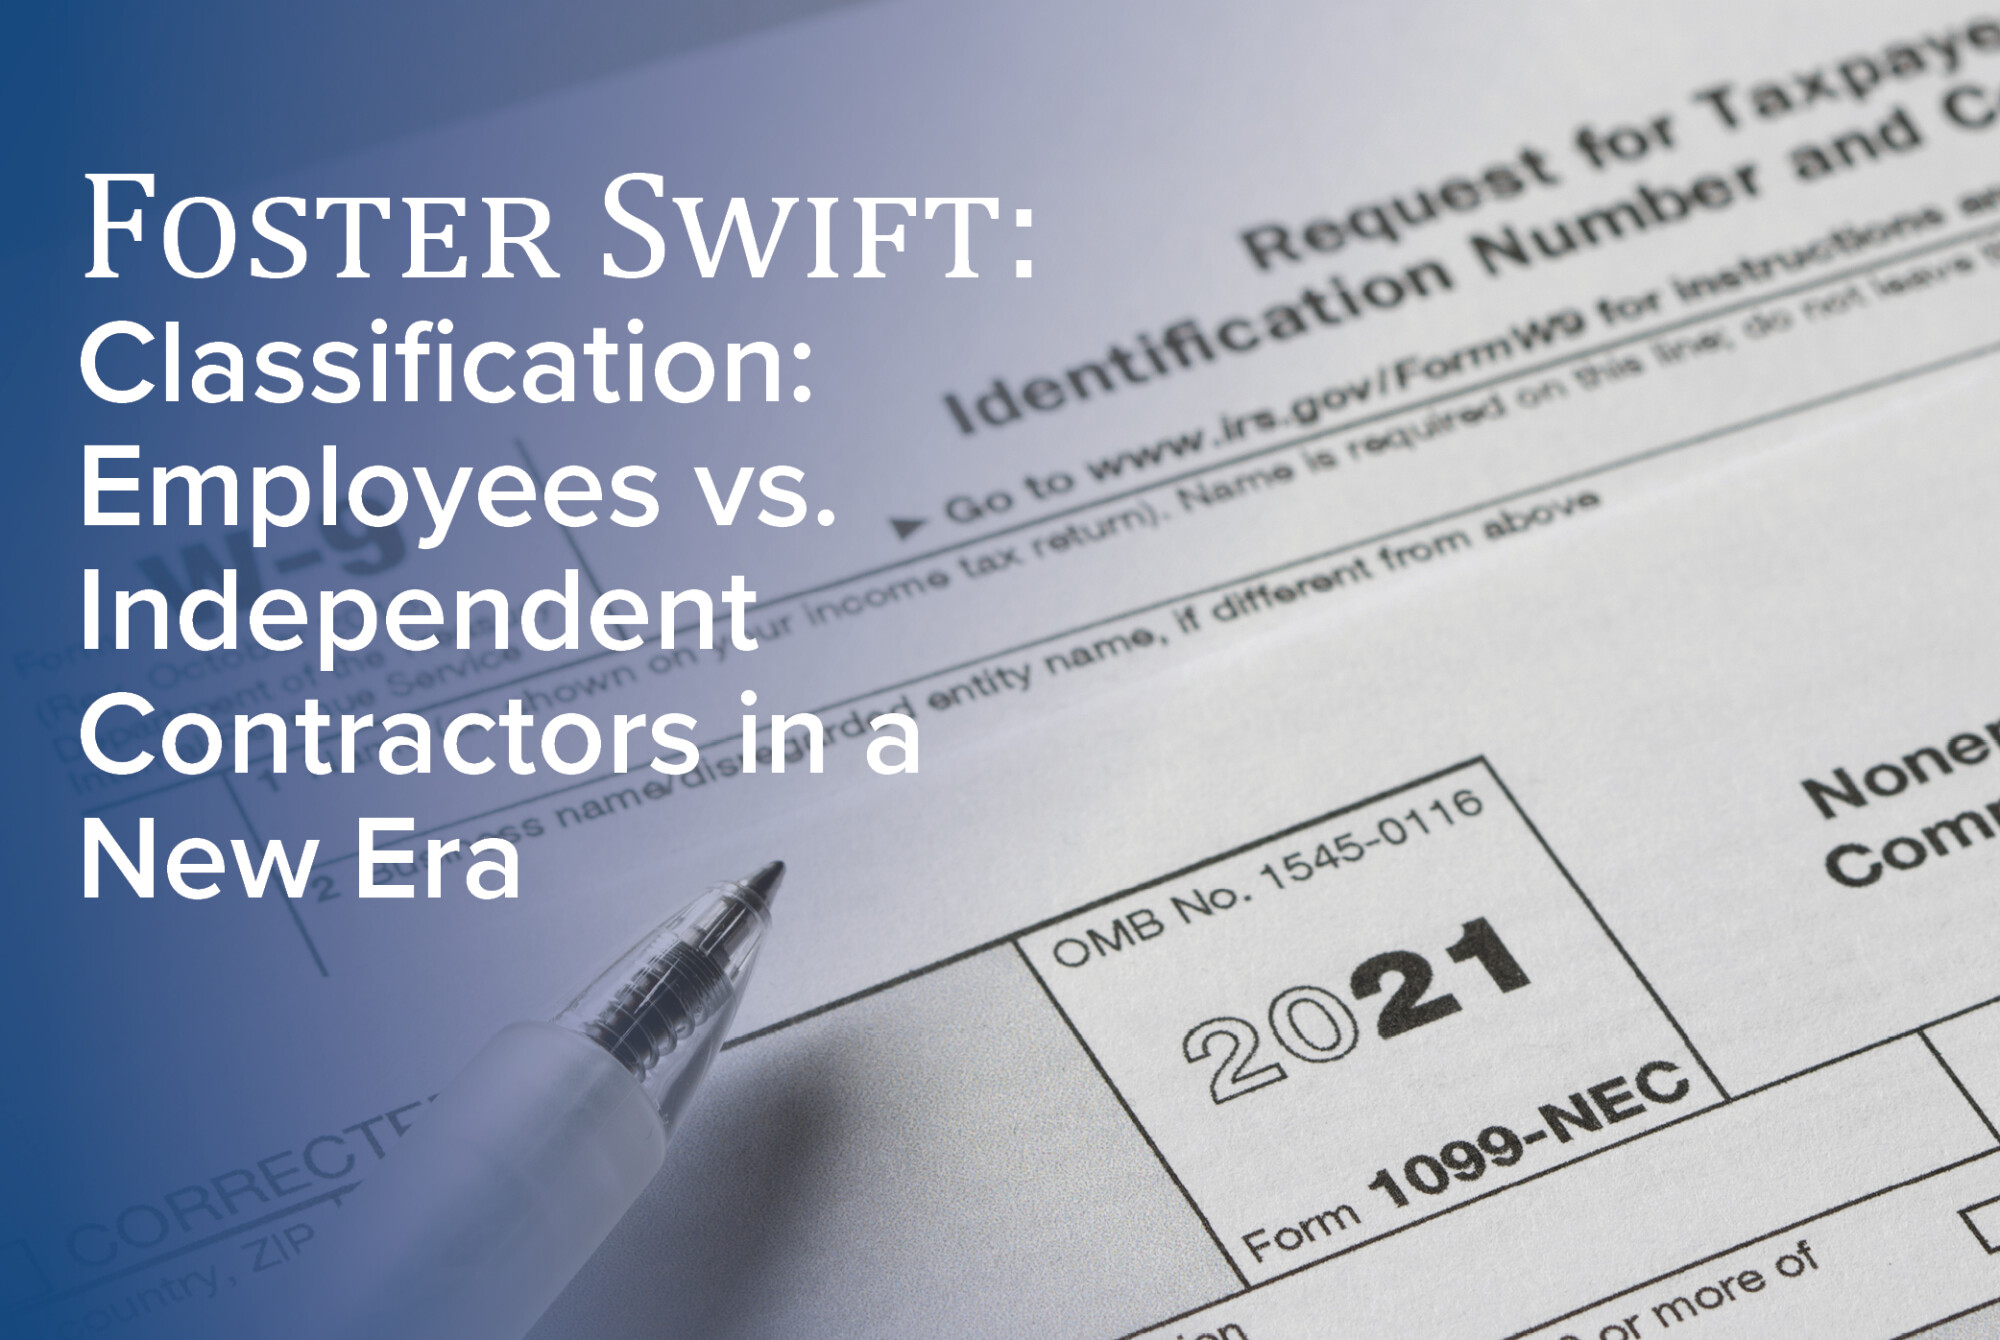 Classification: Employees vs. Independent Contractors in a New Era